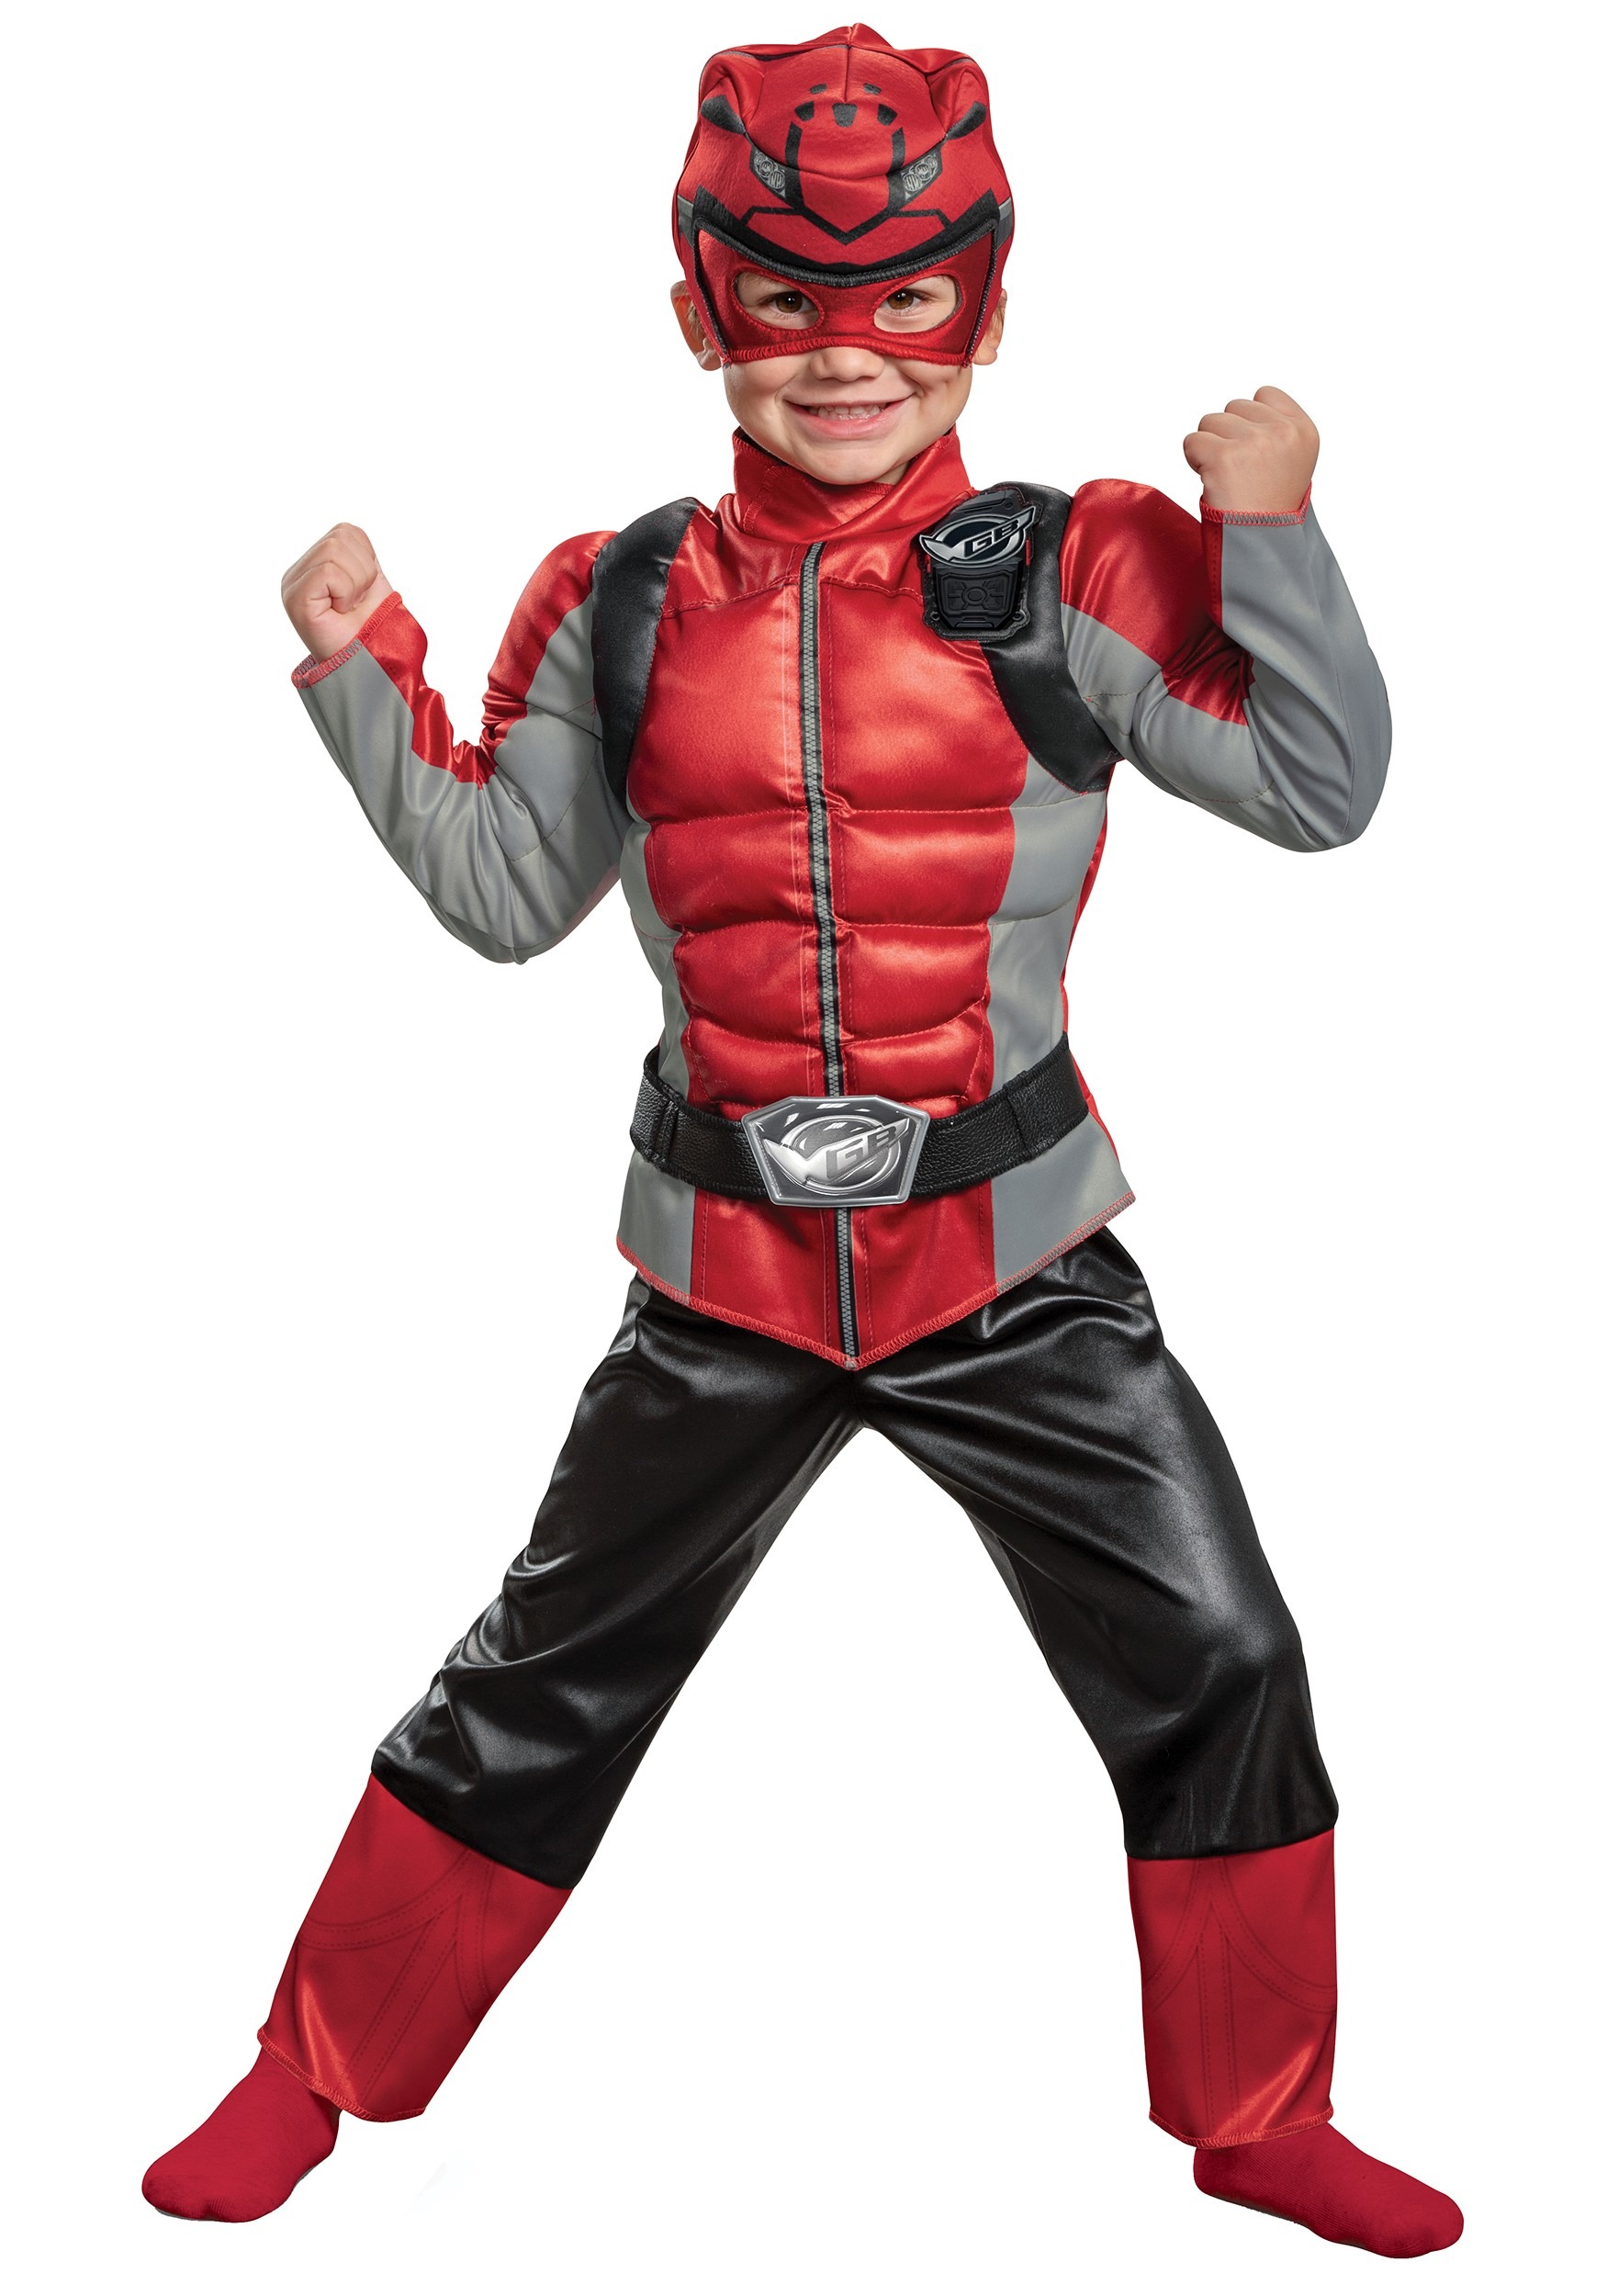 Blue Ranger Classic Childs Costume Small 3-4 years Beast Morphers Costume Rubies Official Power Rangers